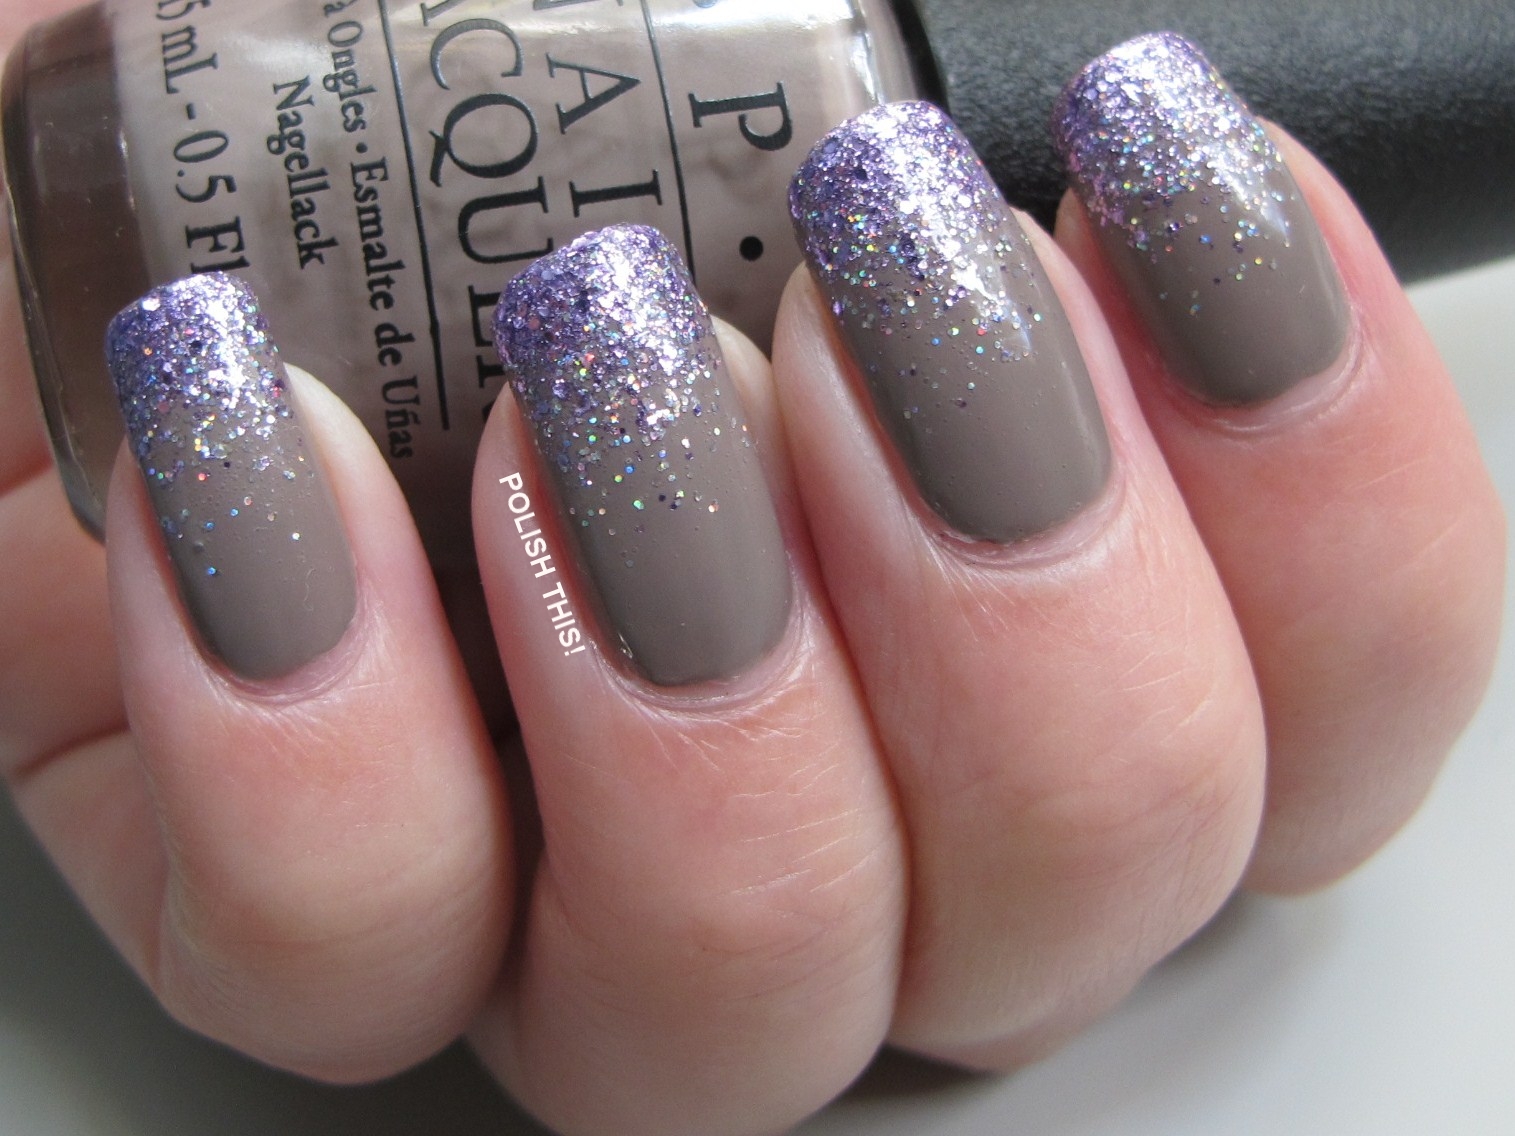 OPI Nail Lacquer in "Berlin There Done That" - wide 1